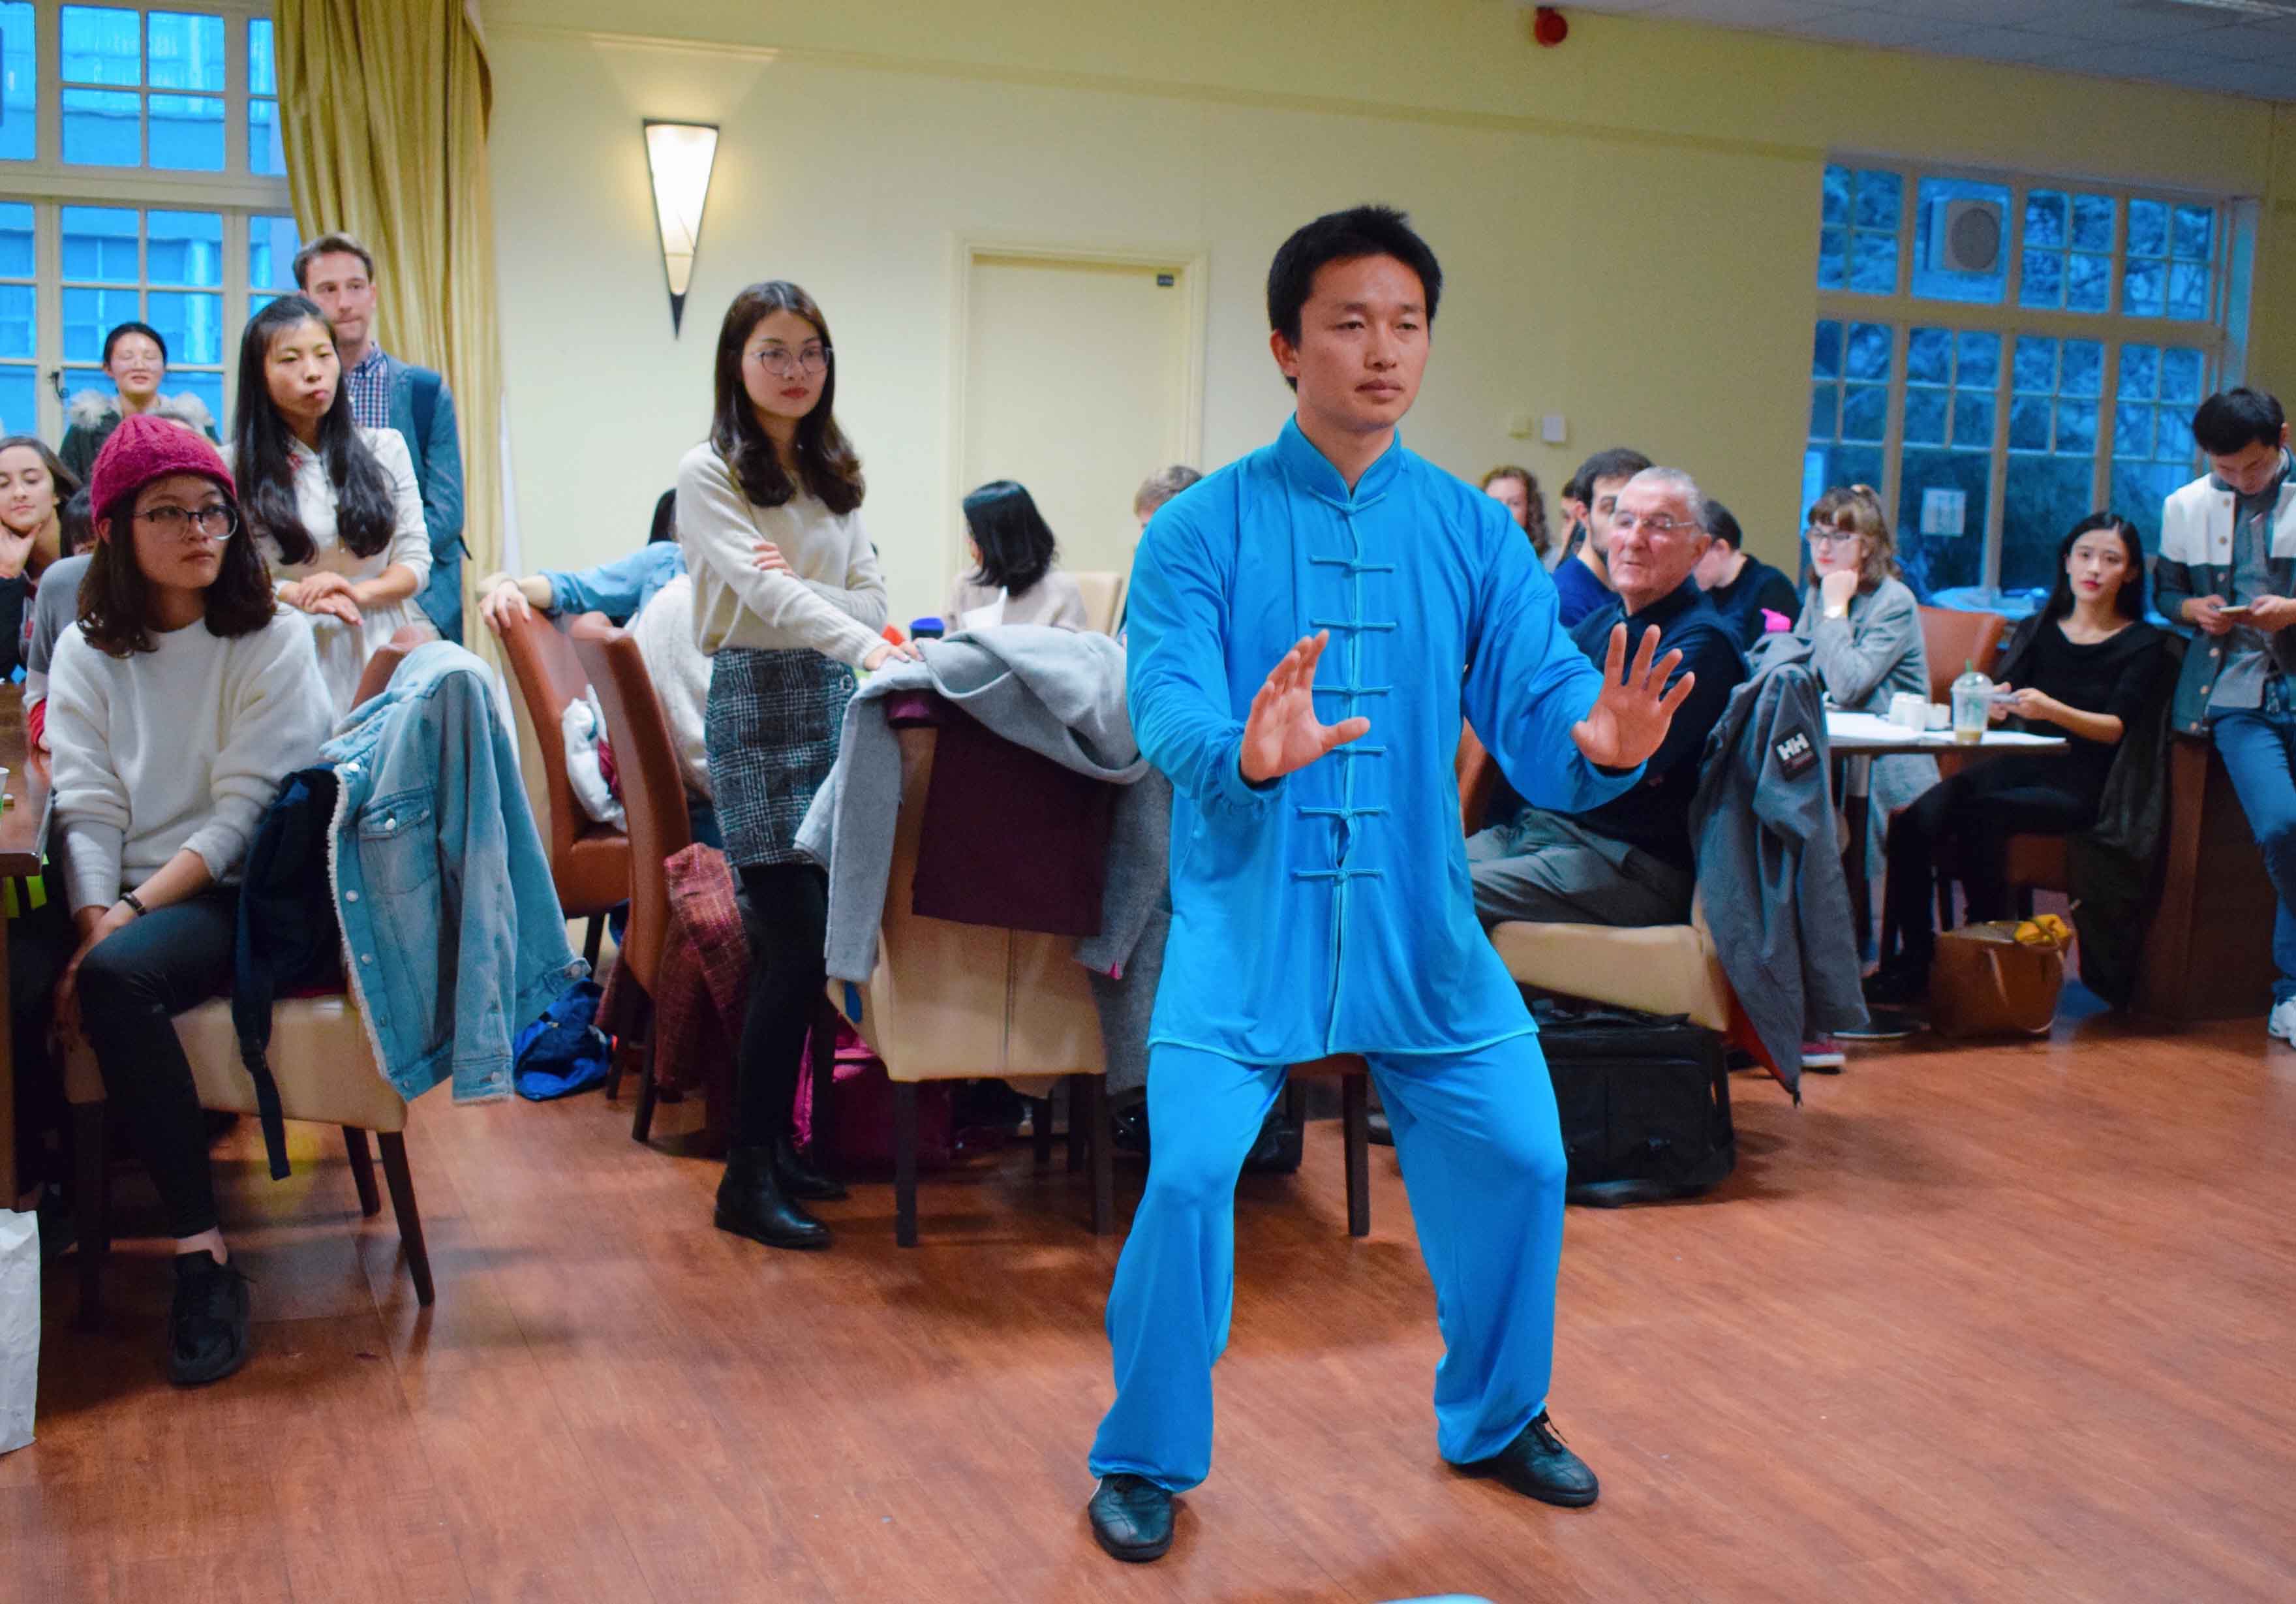 The Confucius Institute of Cork University successfully hosted a Chinese cultural night